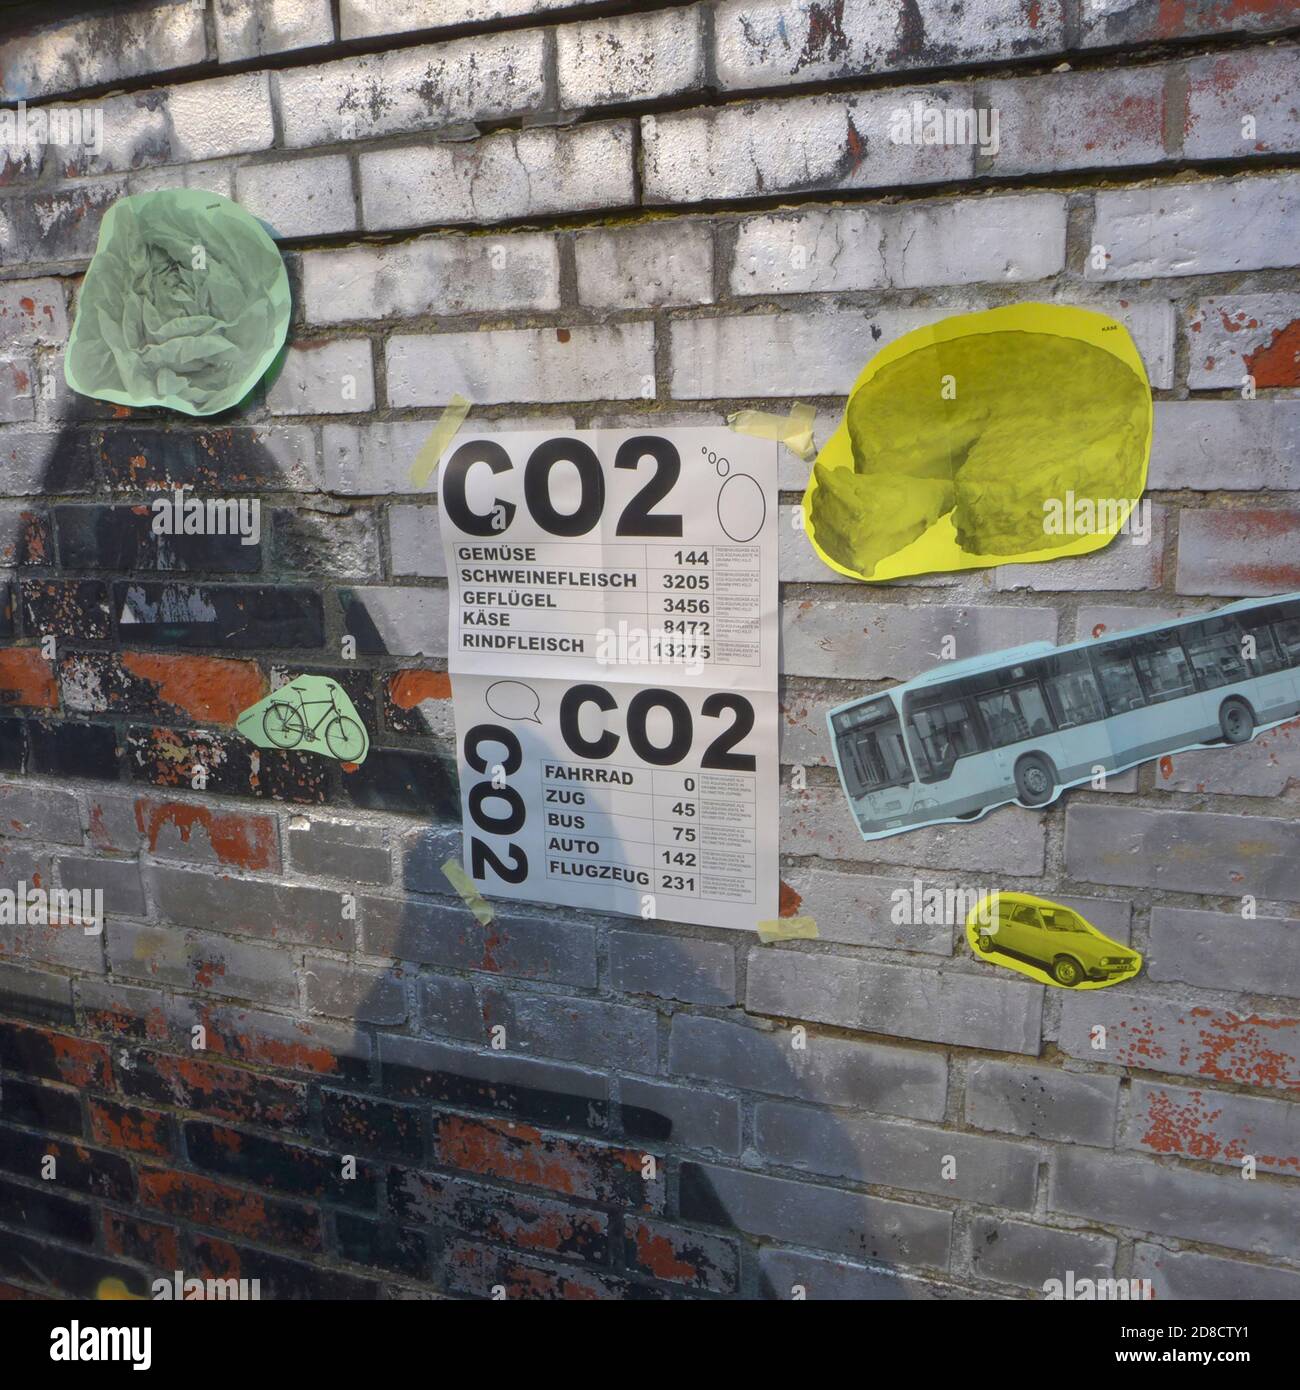 info signs about CO2 emission of food production and traffic, Germany Stock Photo